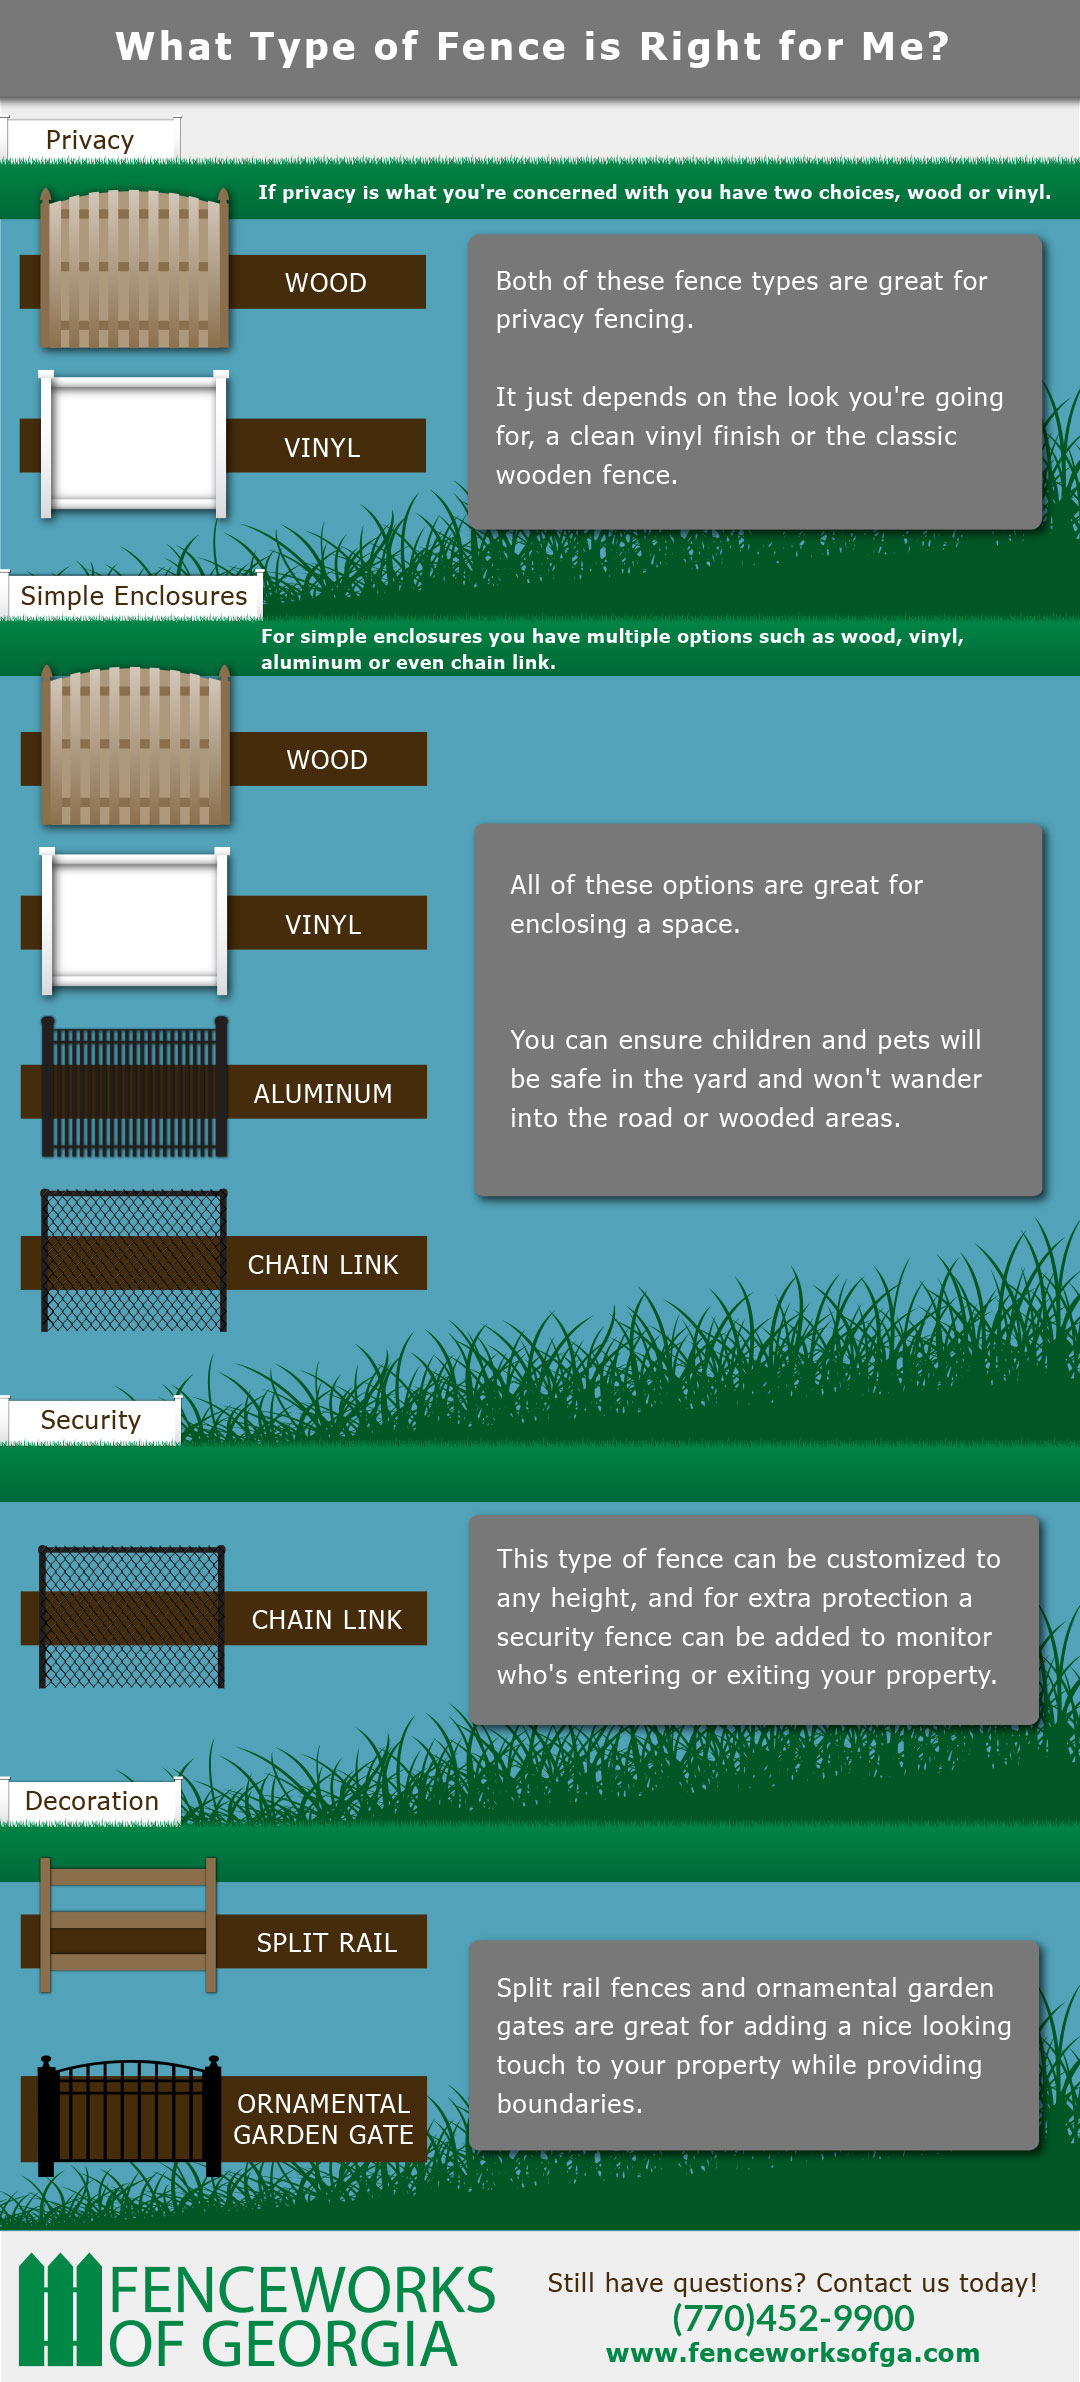 What Type of Fence - Infographic - Atlanta Fence Company